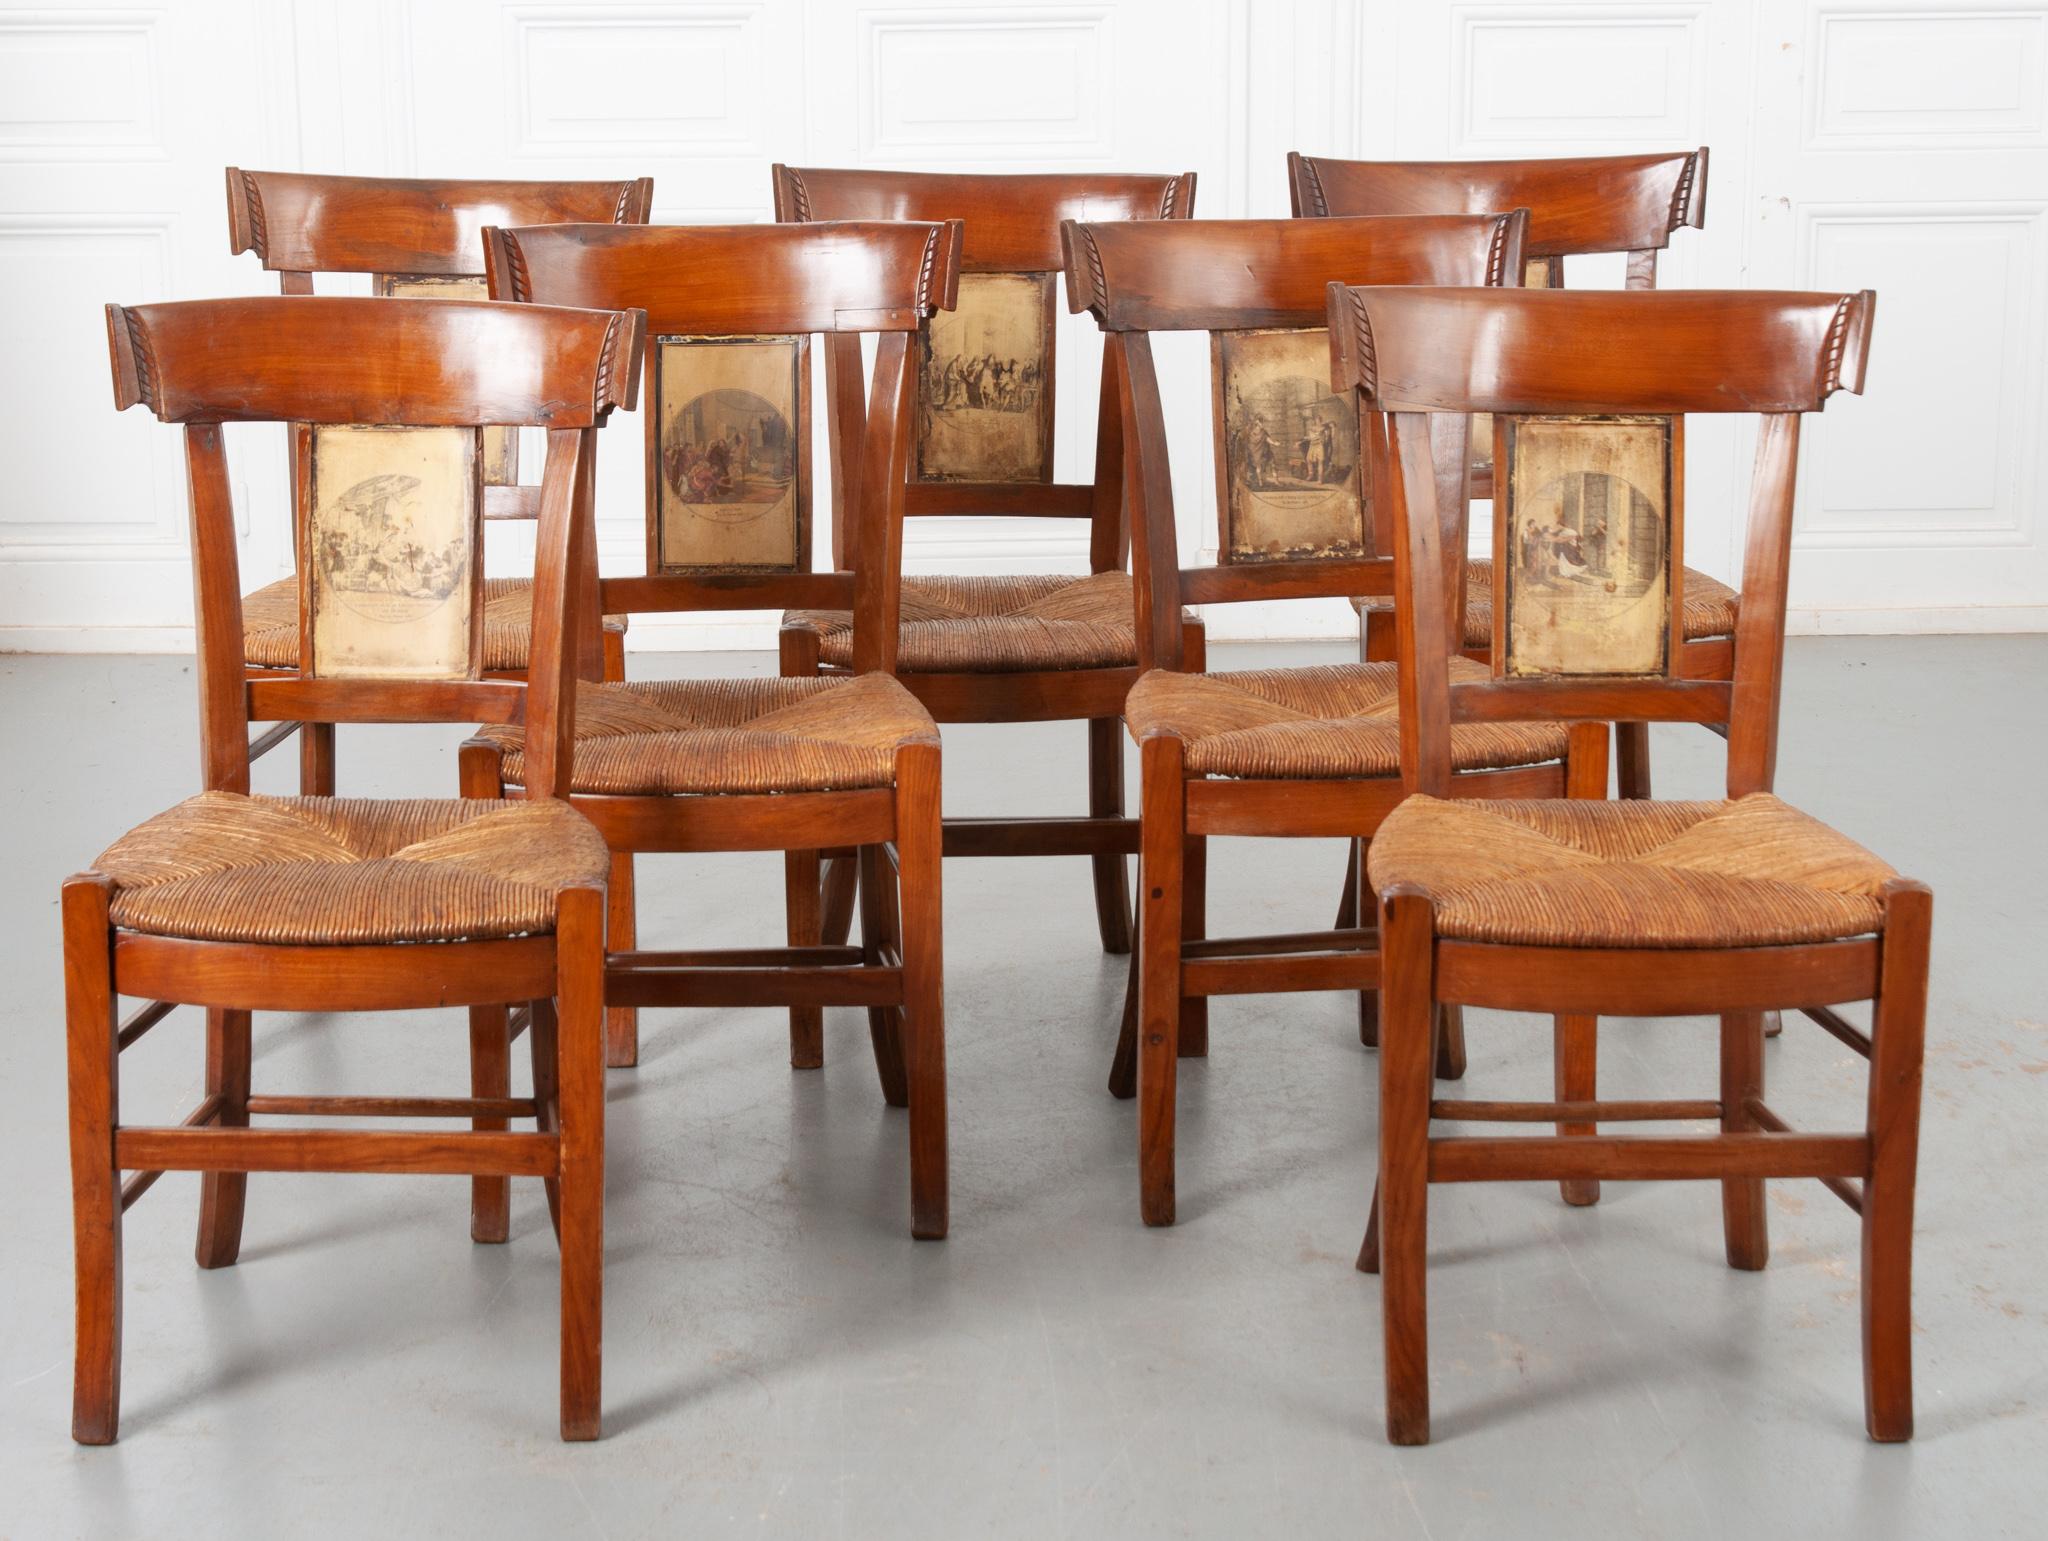 Set of 7 Fruitwood Rush Seat Chairs 11